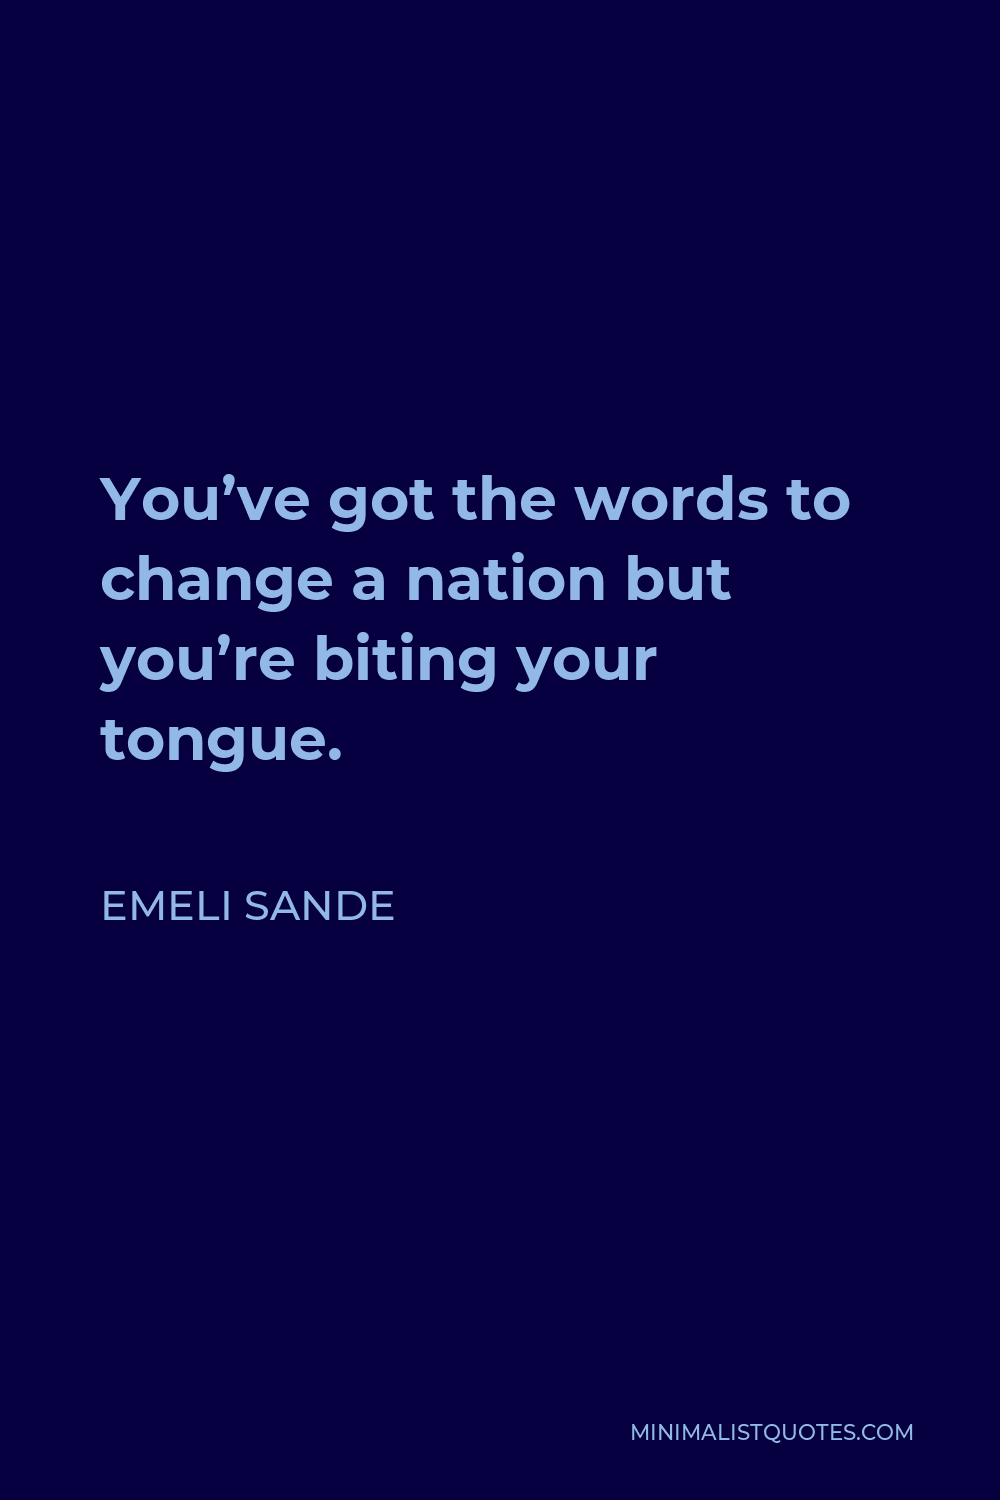 Emeli Sande Quote - You’ve got the words to change a nation but you’re biting your tongue.